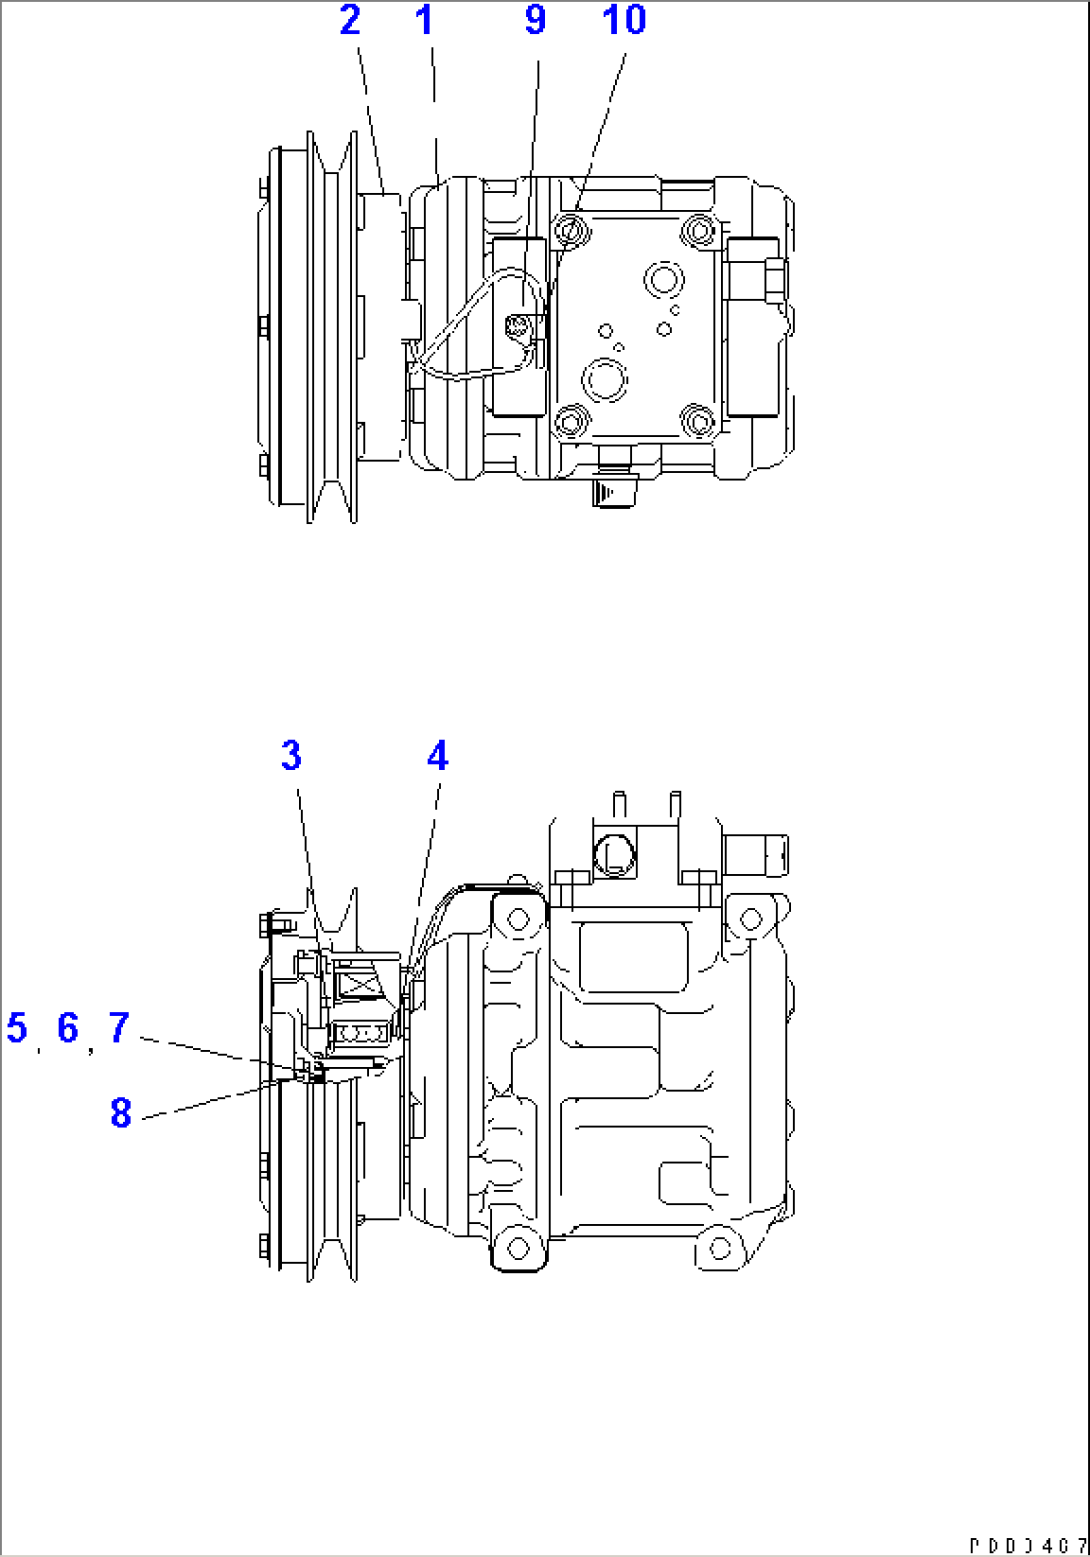 AIR COMPRESSOR (FOR SAND DUST)(#53192-.)